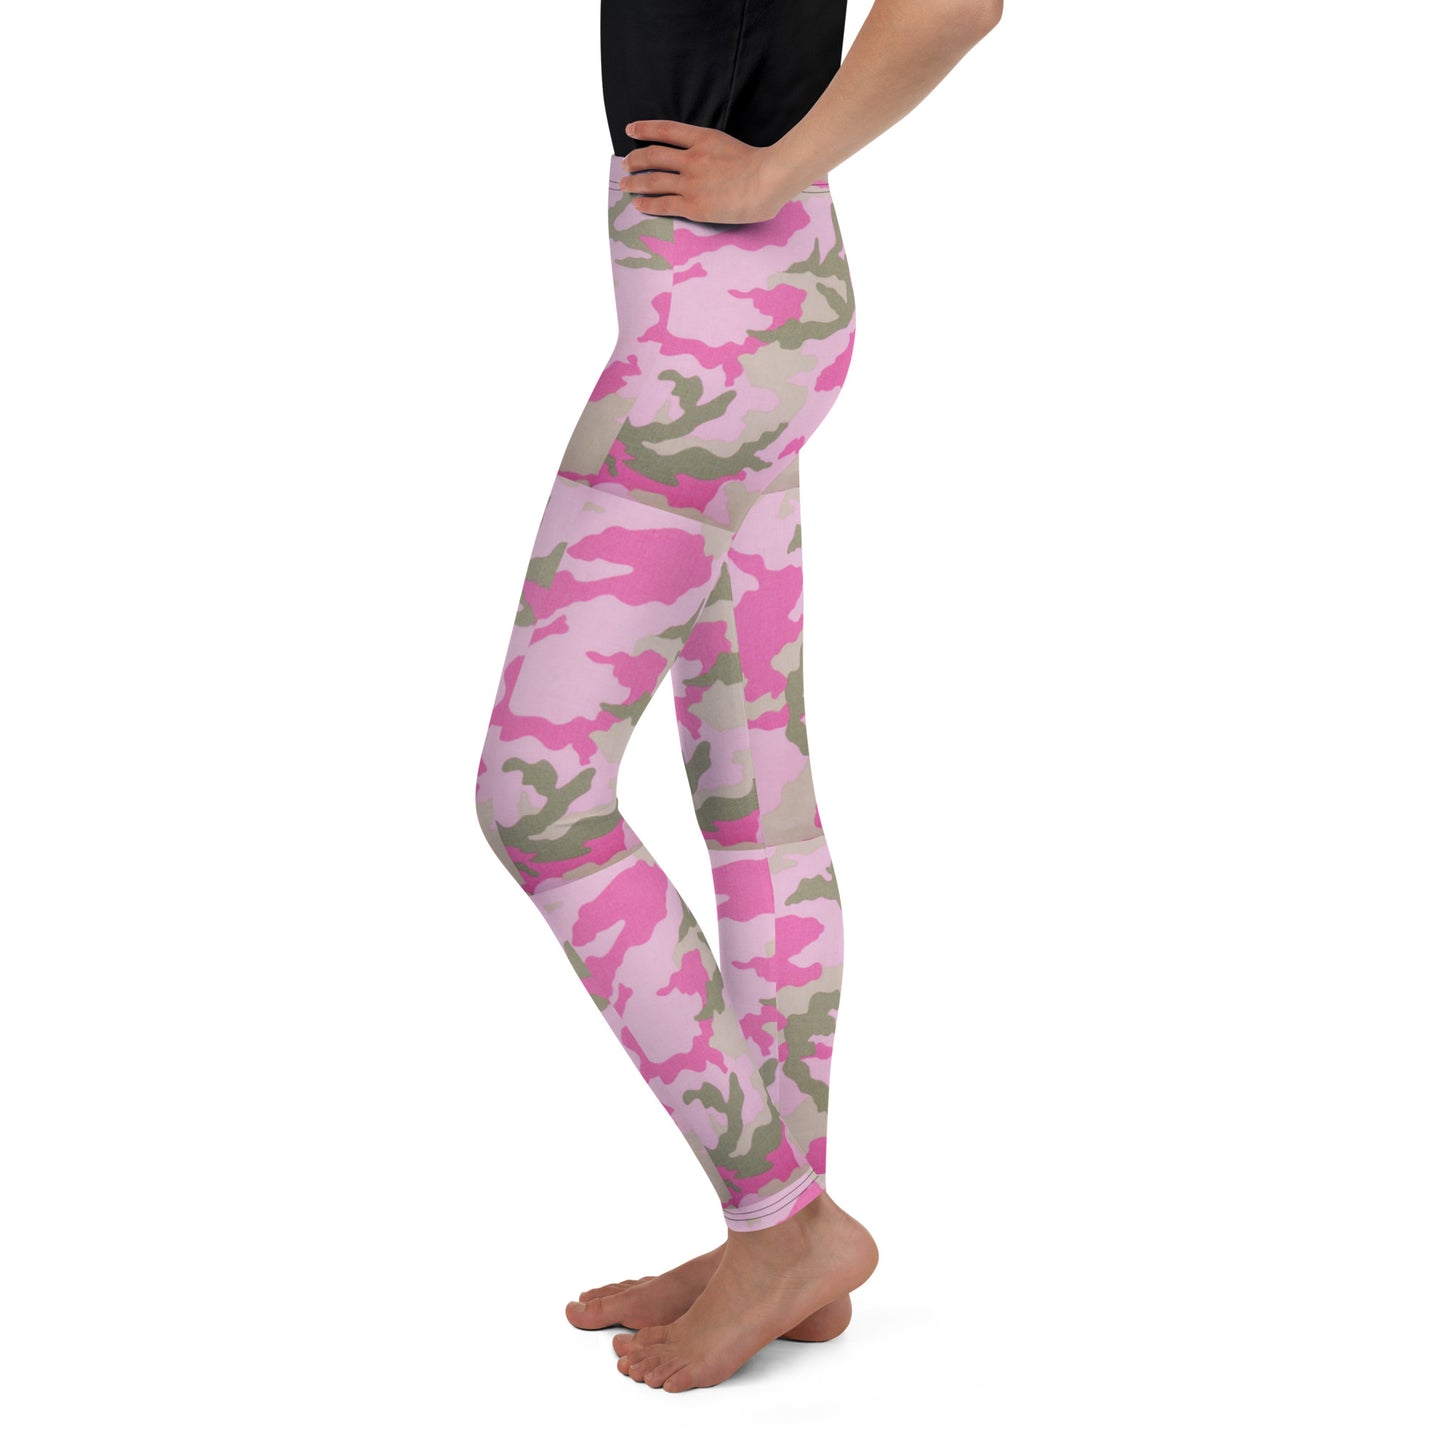 Youth Leggings - Pink Green Camouflage